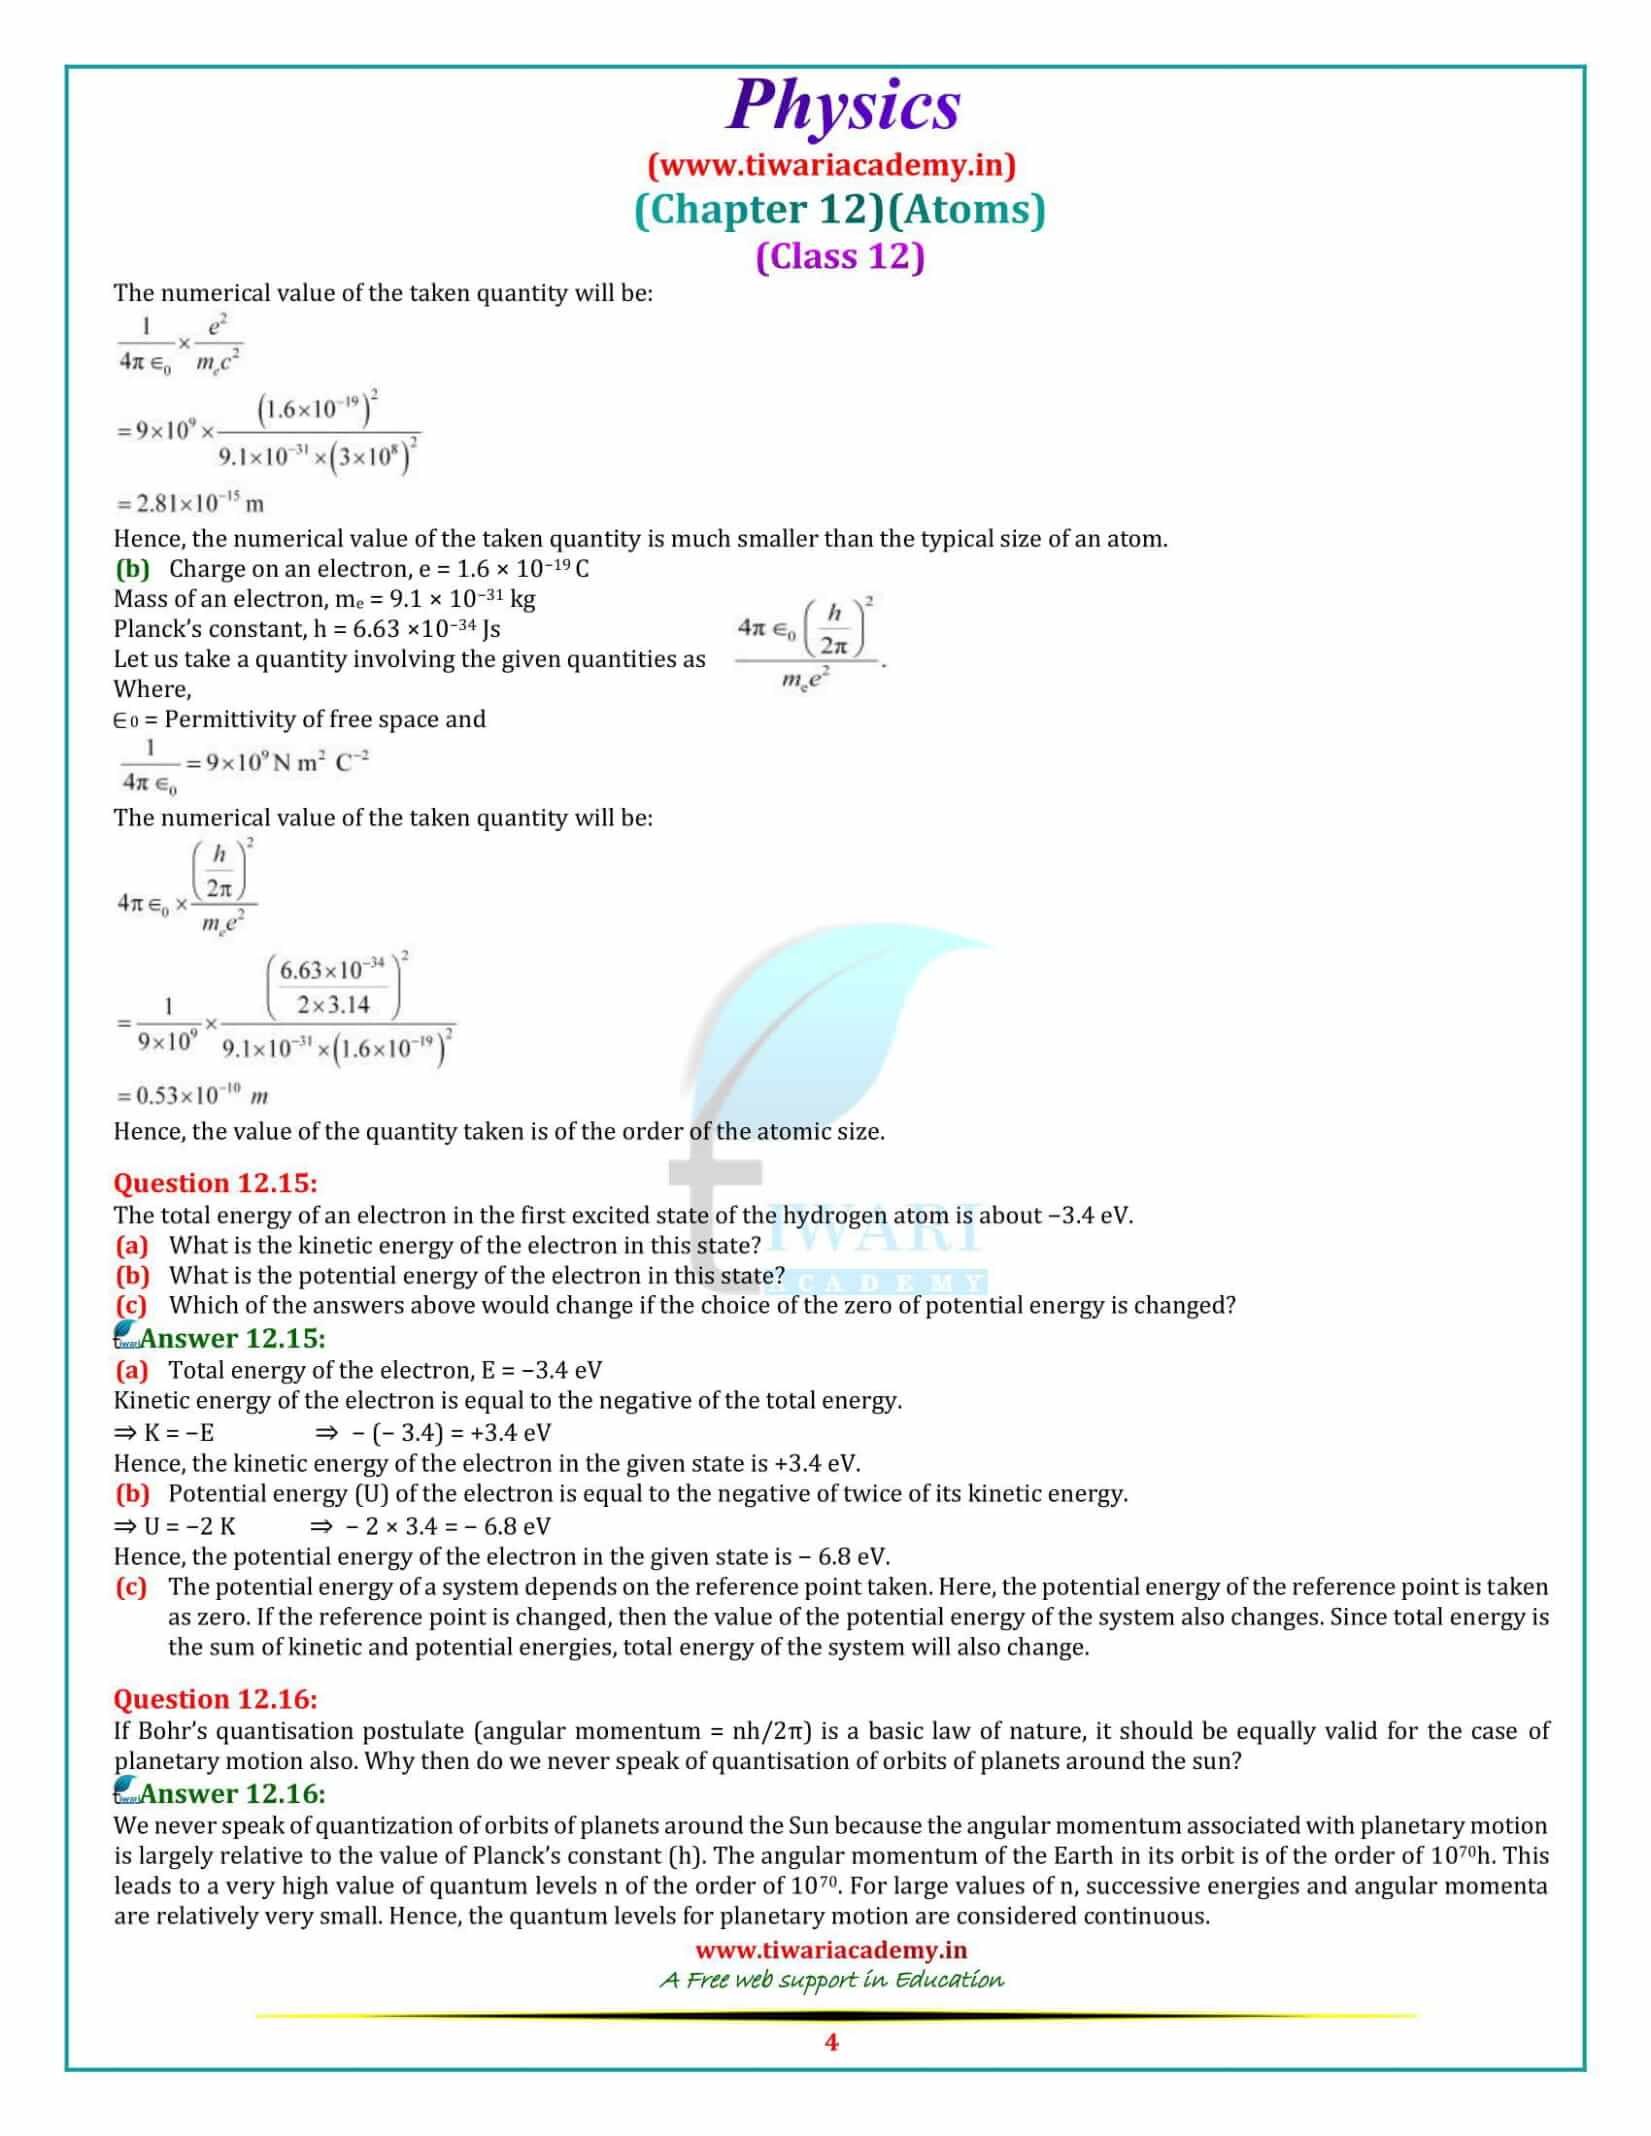 12 Physics Chapter 12 Atom additional exercises all question answers